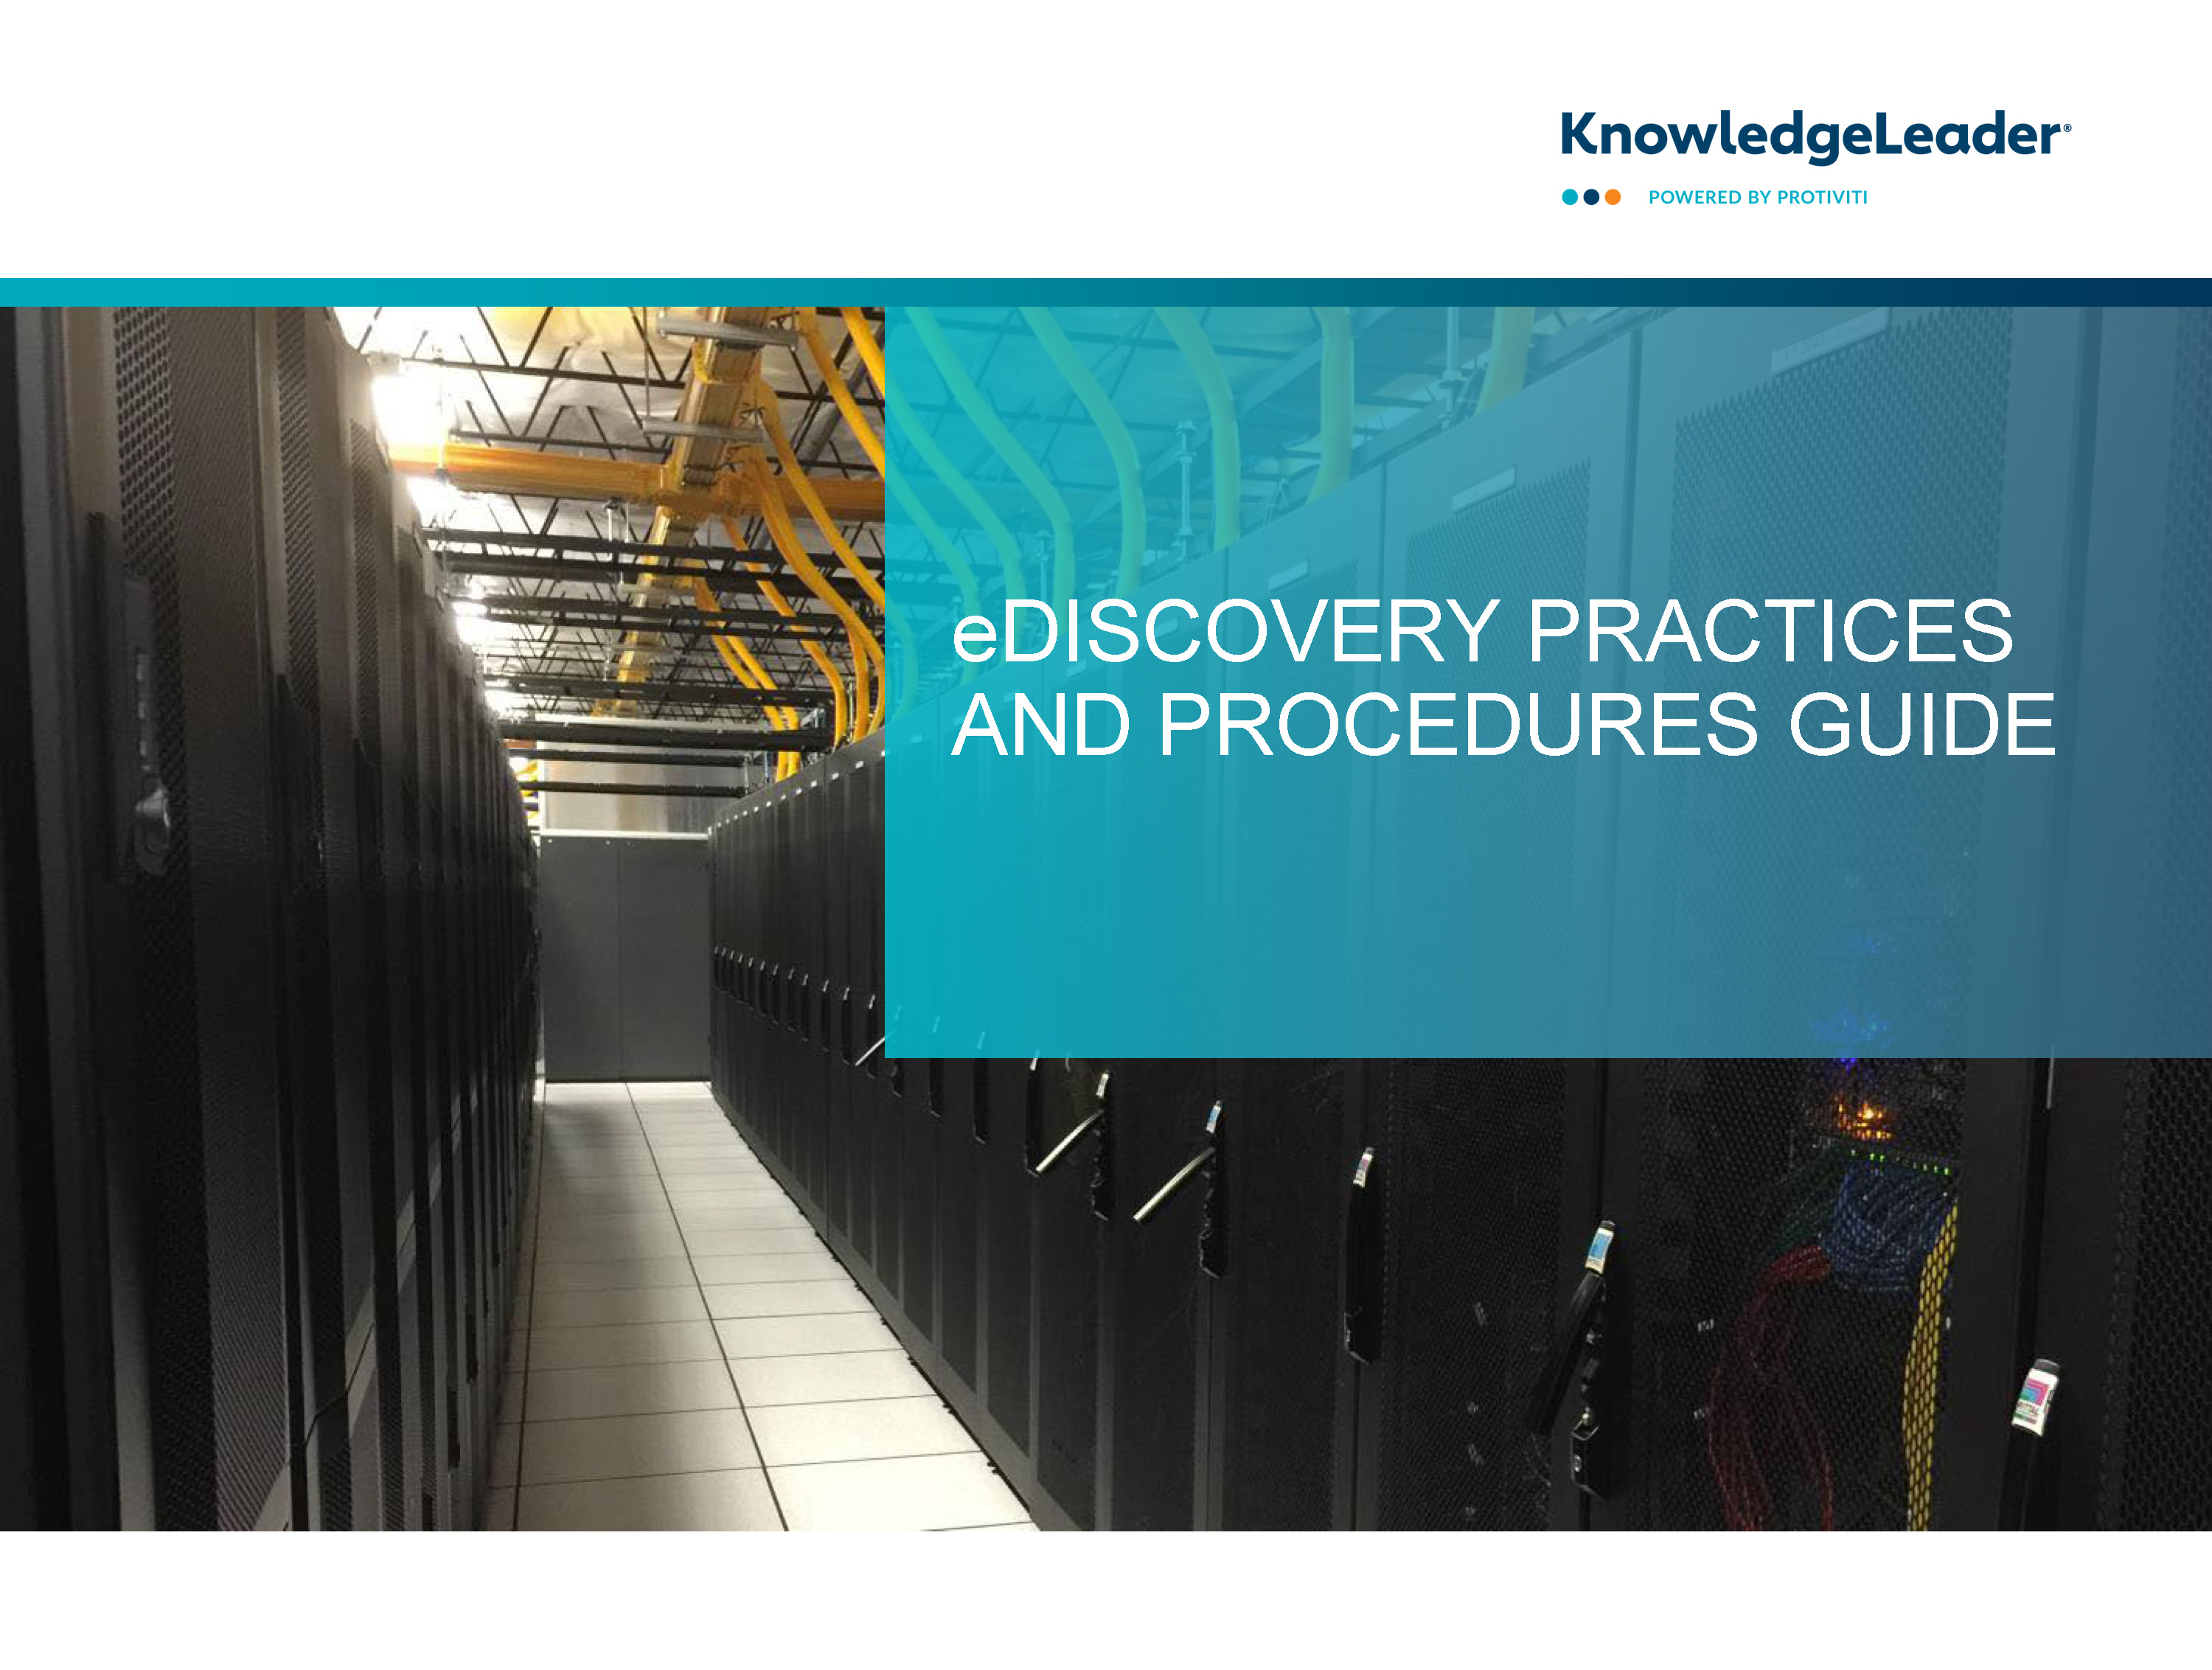 Screenshot of the first page of eDiscovery Practices and Procedures Guide